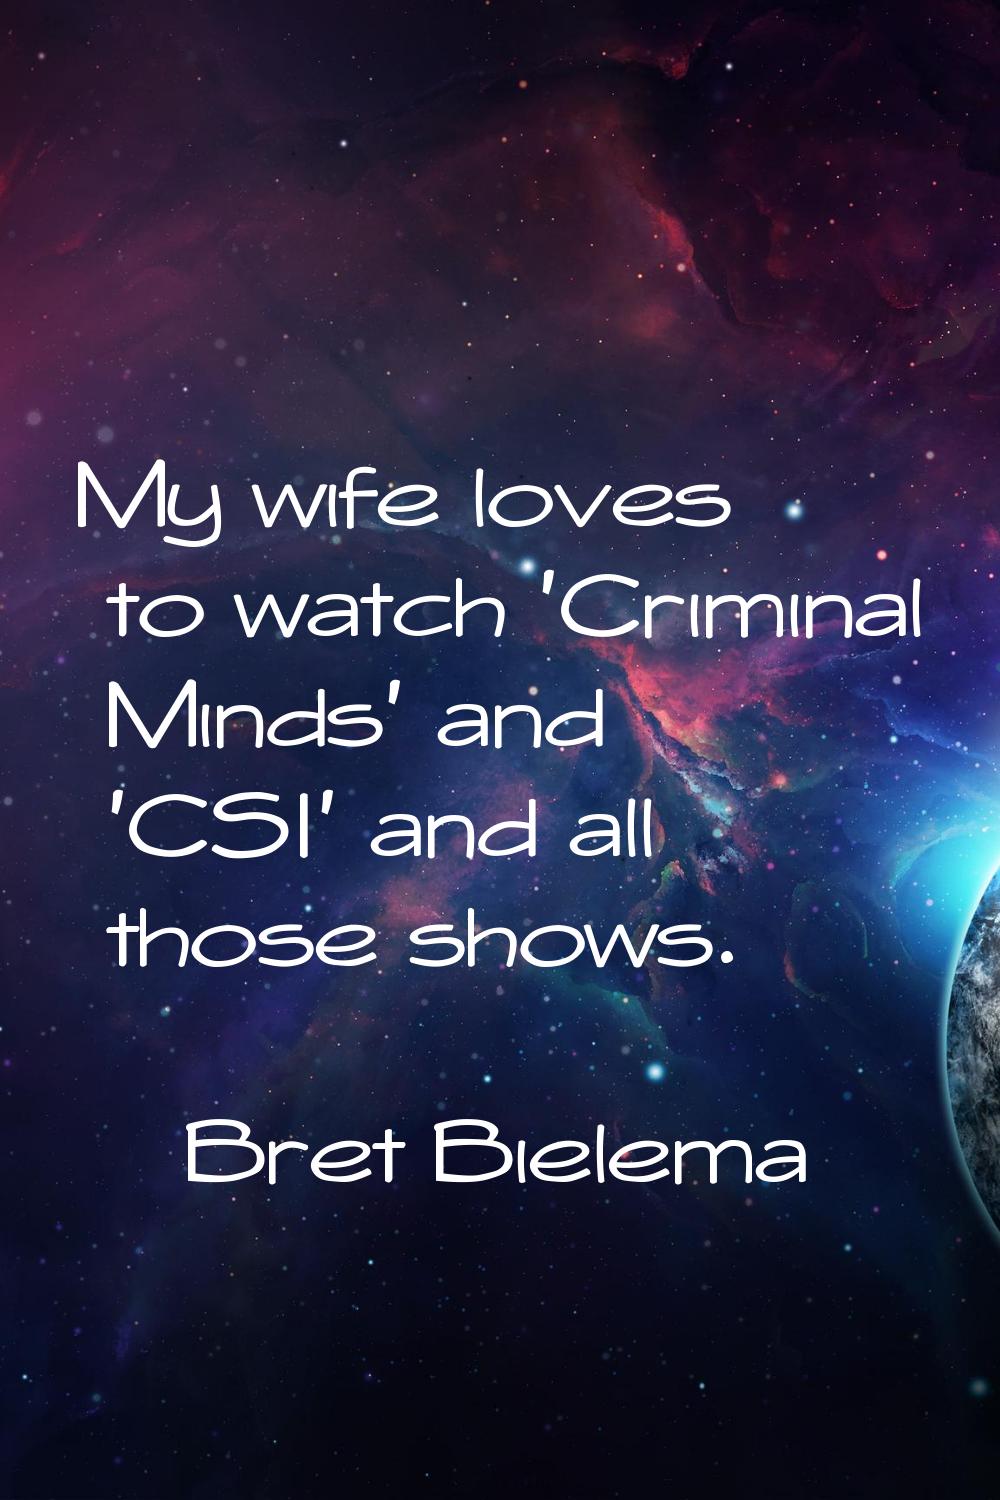 My wife loves to watch 'Criminal Minds' and 'CSI' and all those shows.